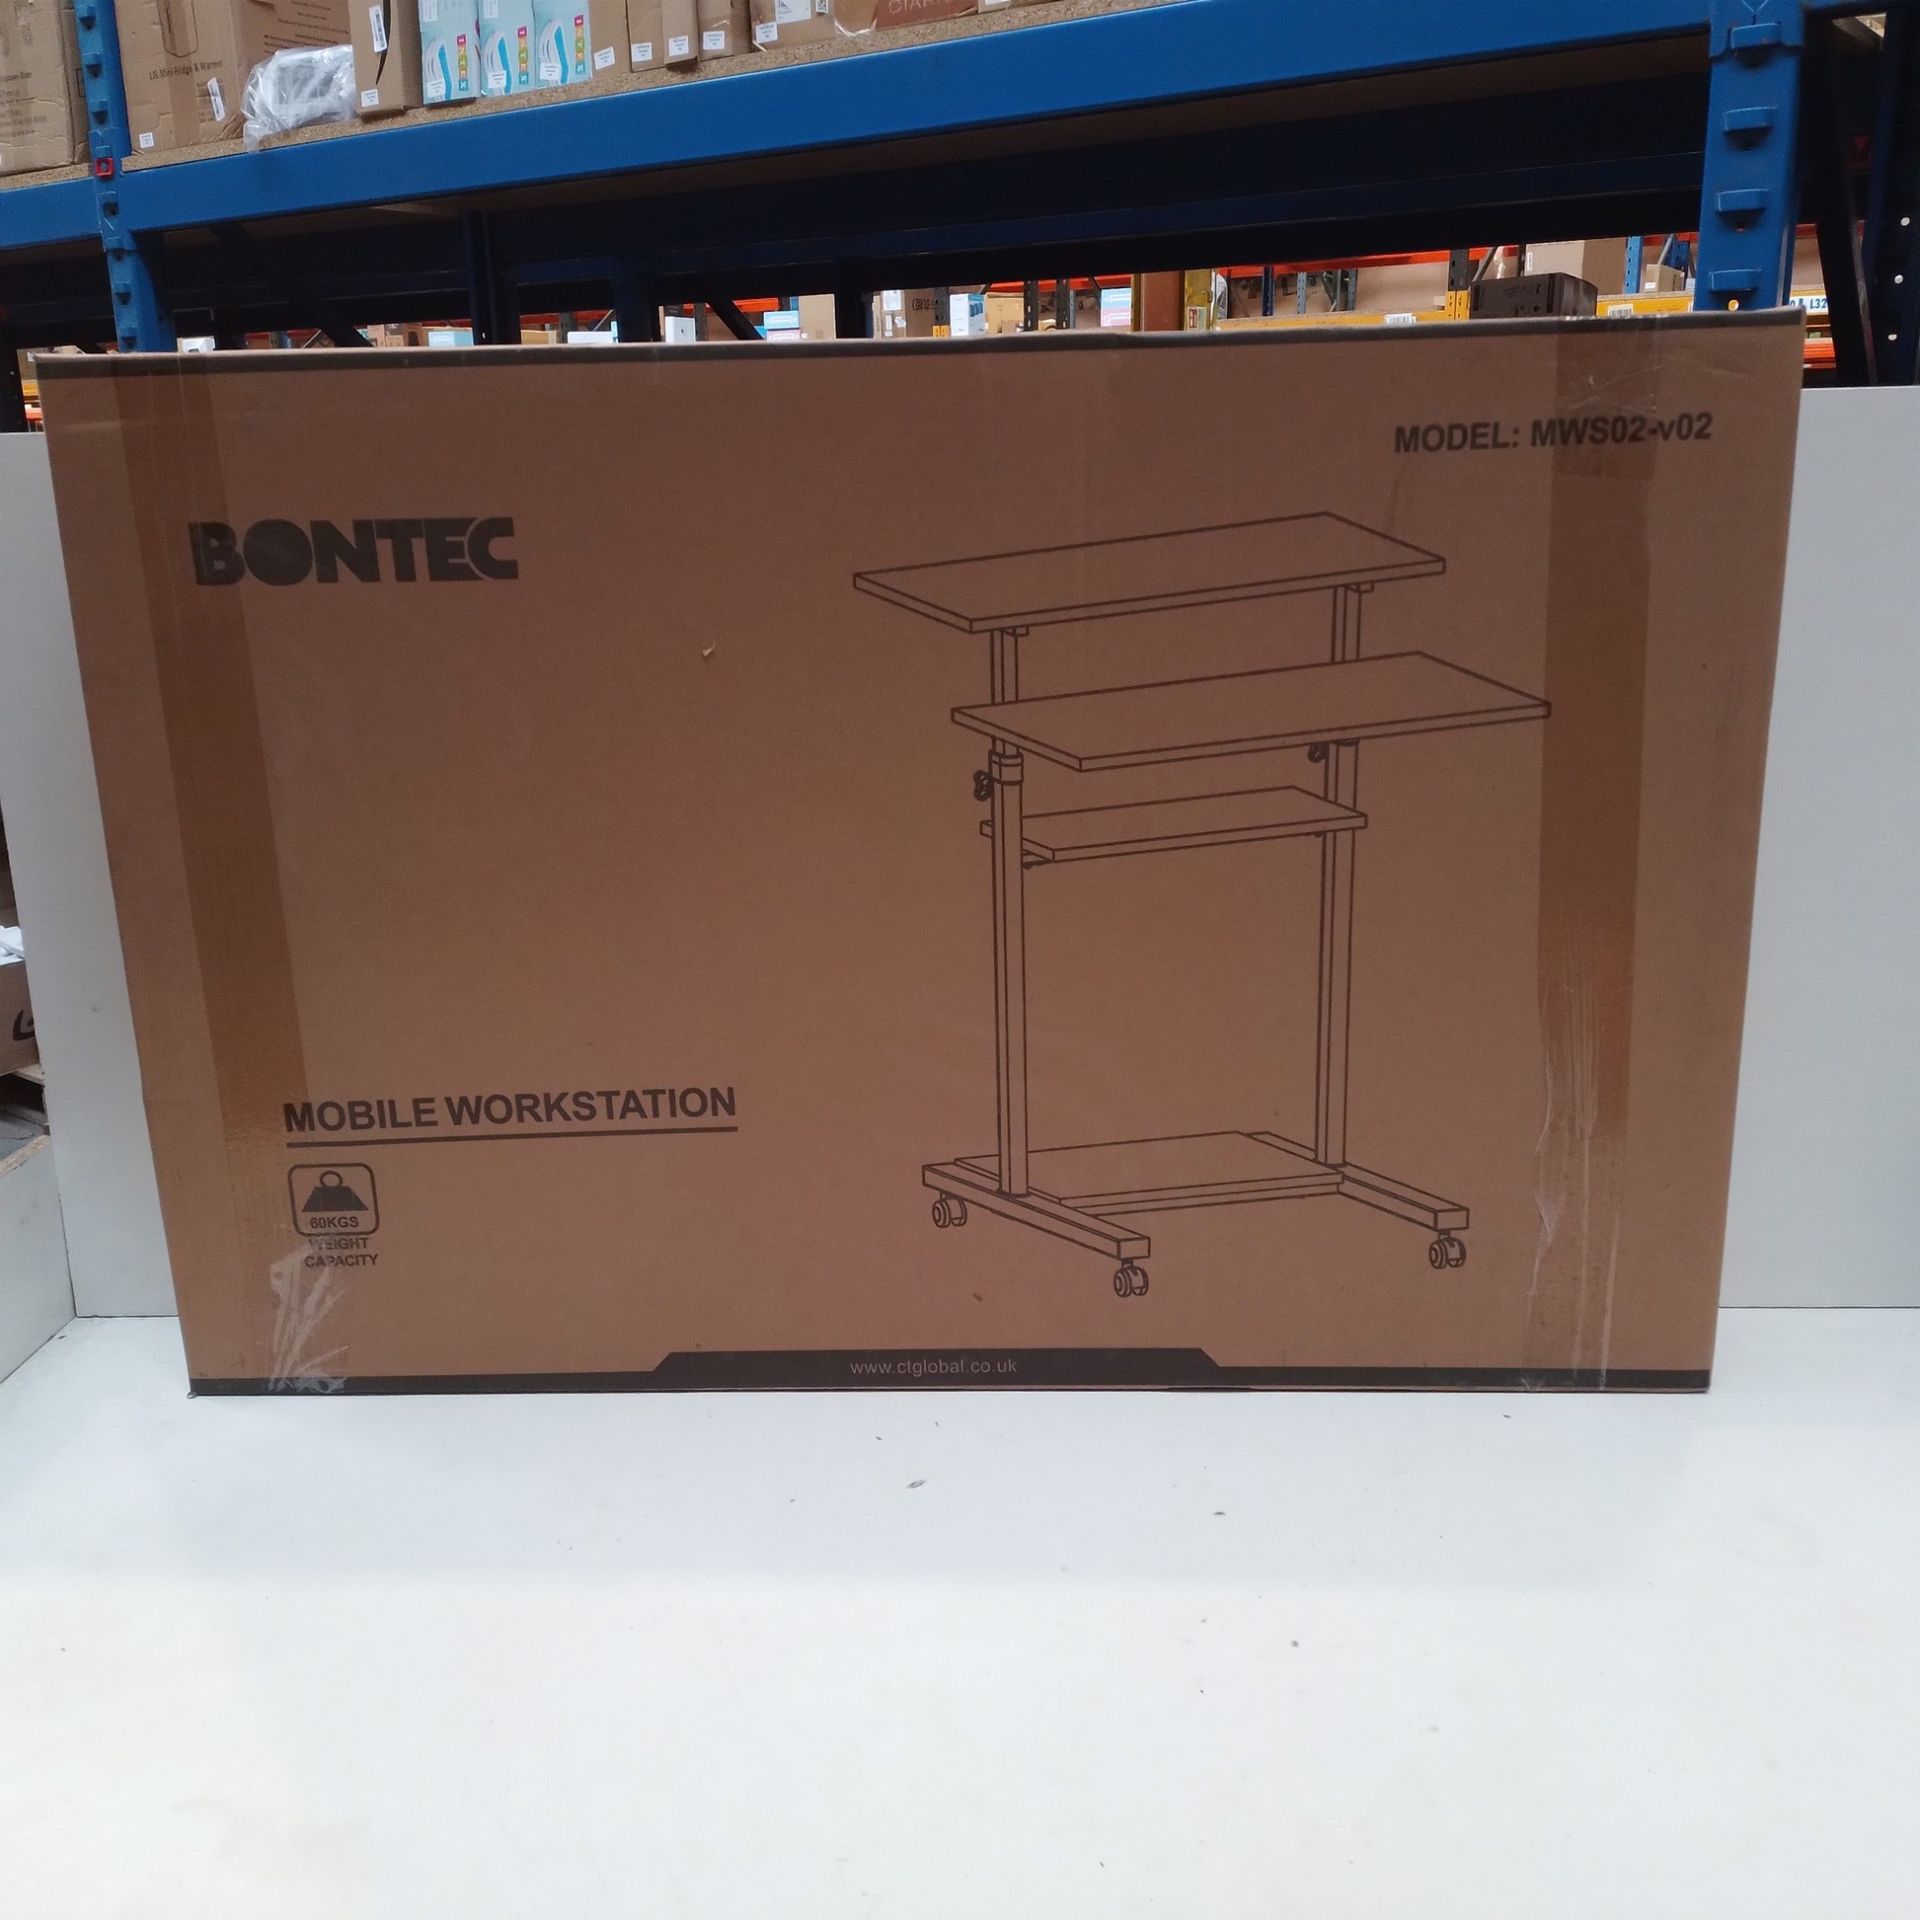 RRP £91.98 BONTEC Mobile Workstation Compact Stand-up Computer - Image 2 of 2